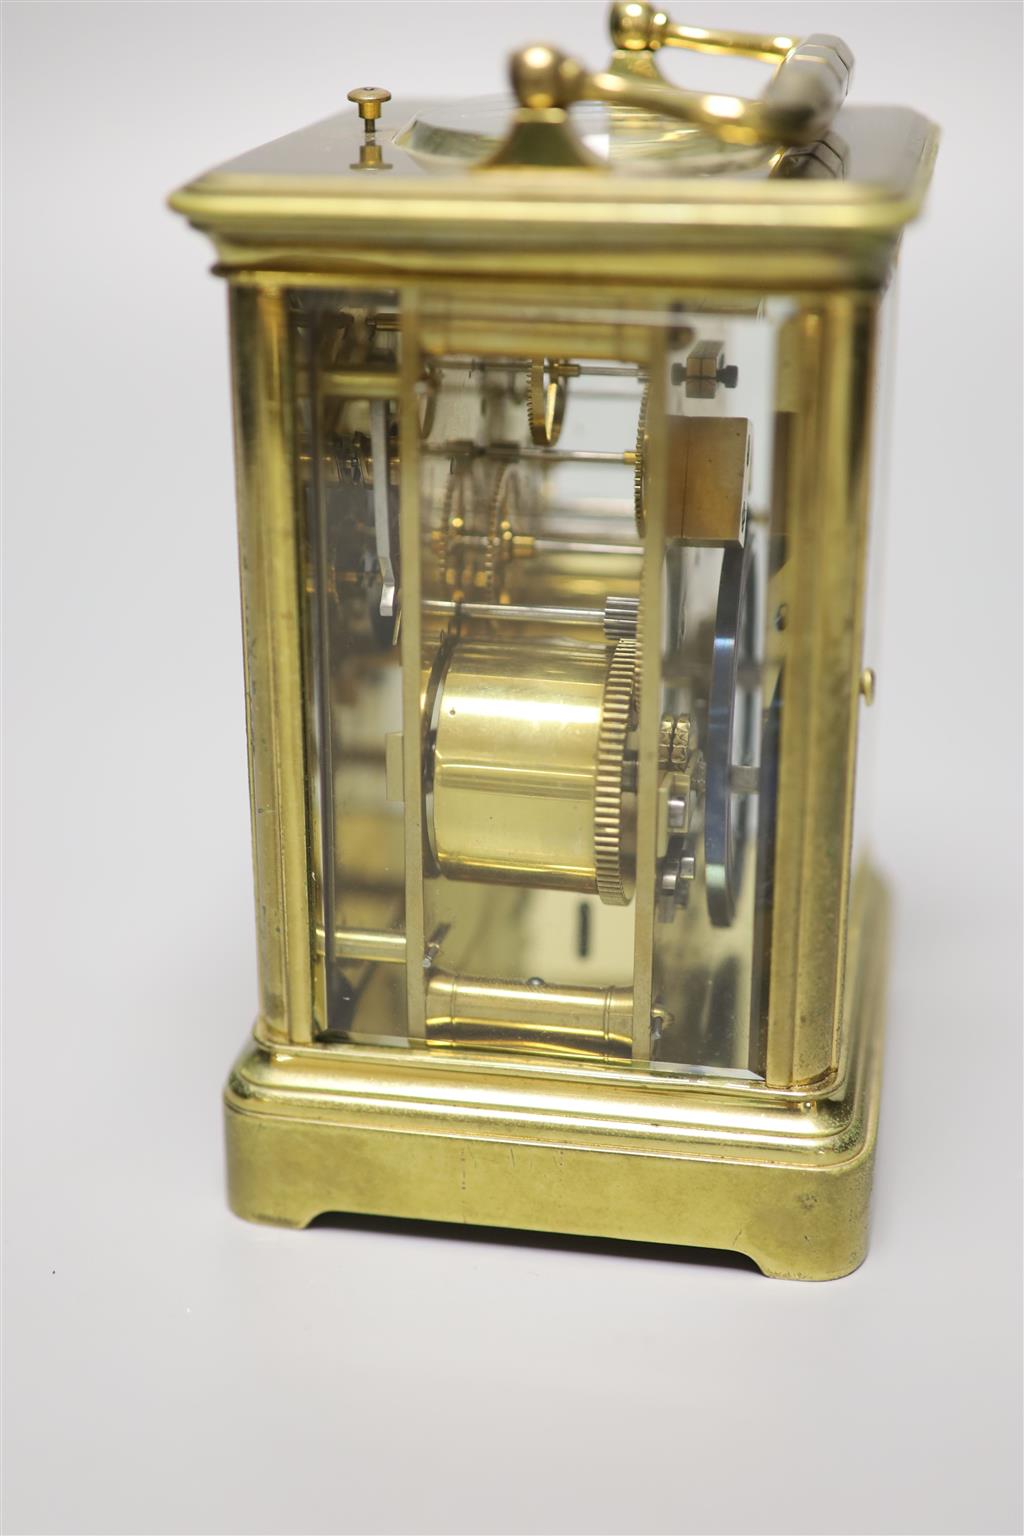 A brass carriage clock by Howell James & Co, height with handle down 13.5cm